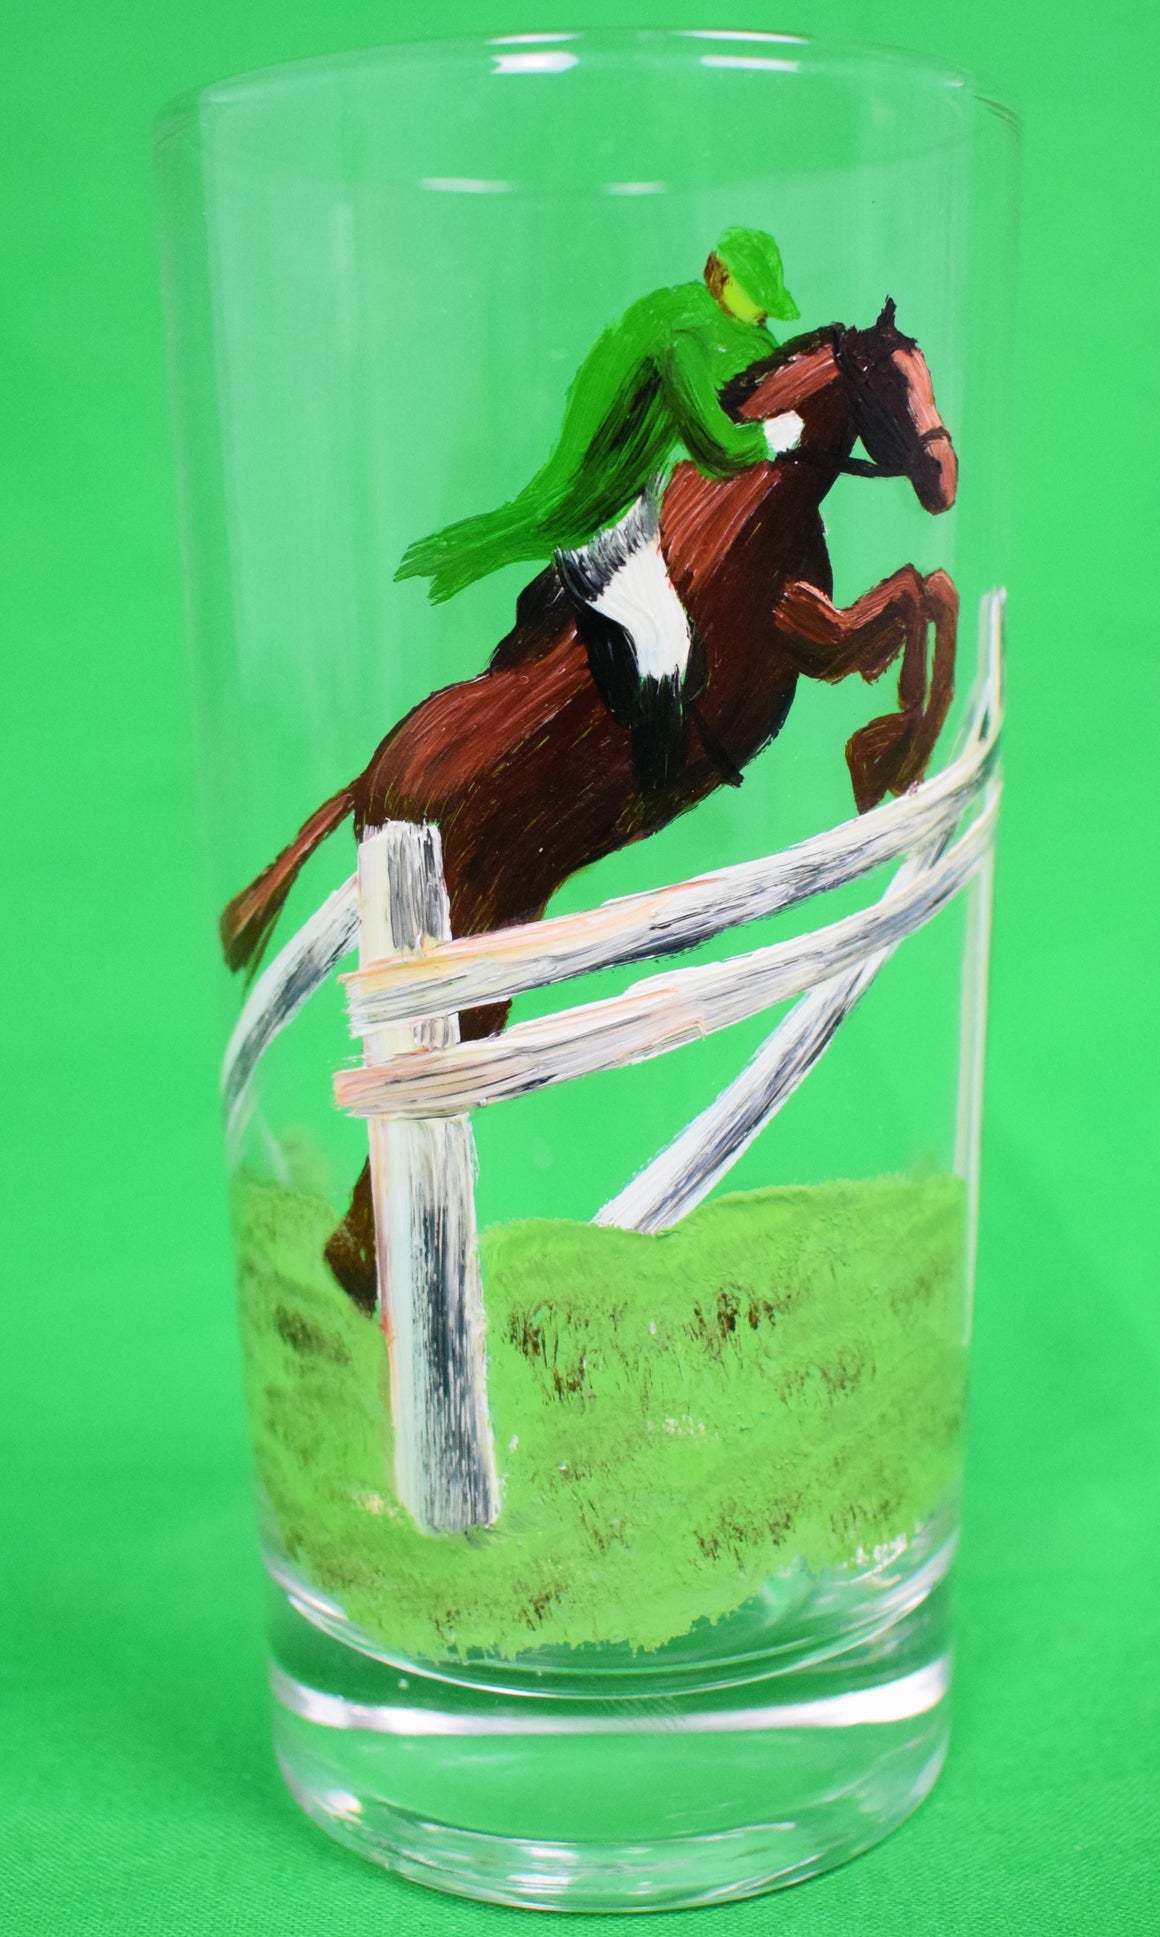 "Set x 6 Steeplechase Hand-Painted Glasses"